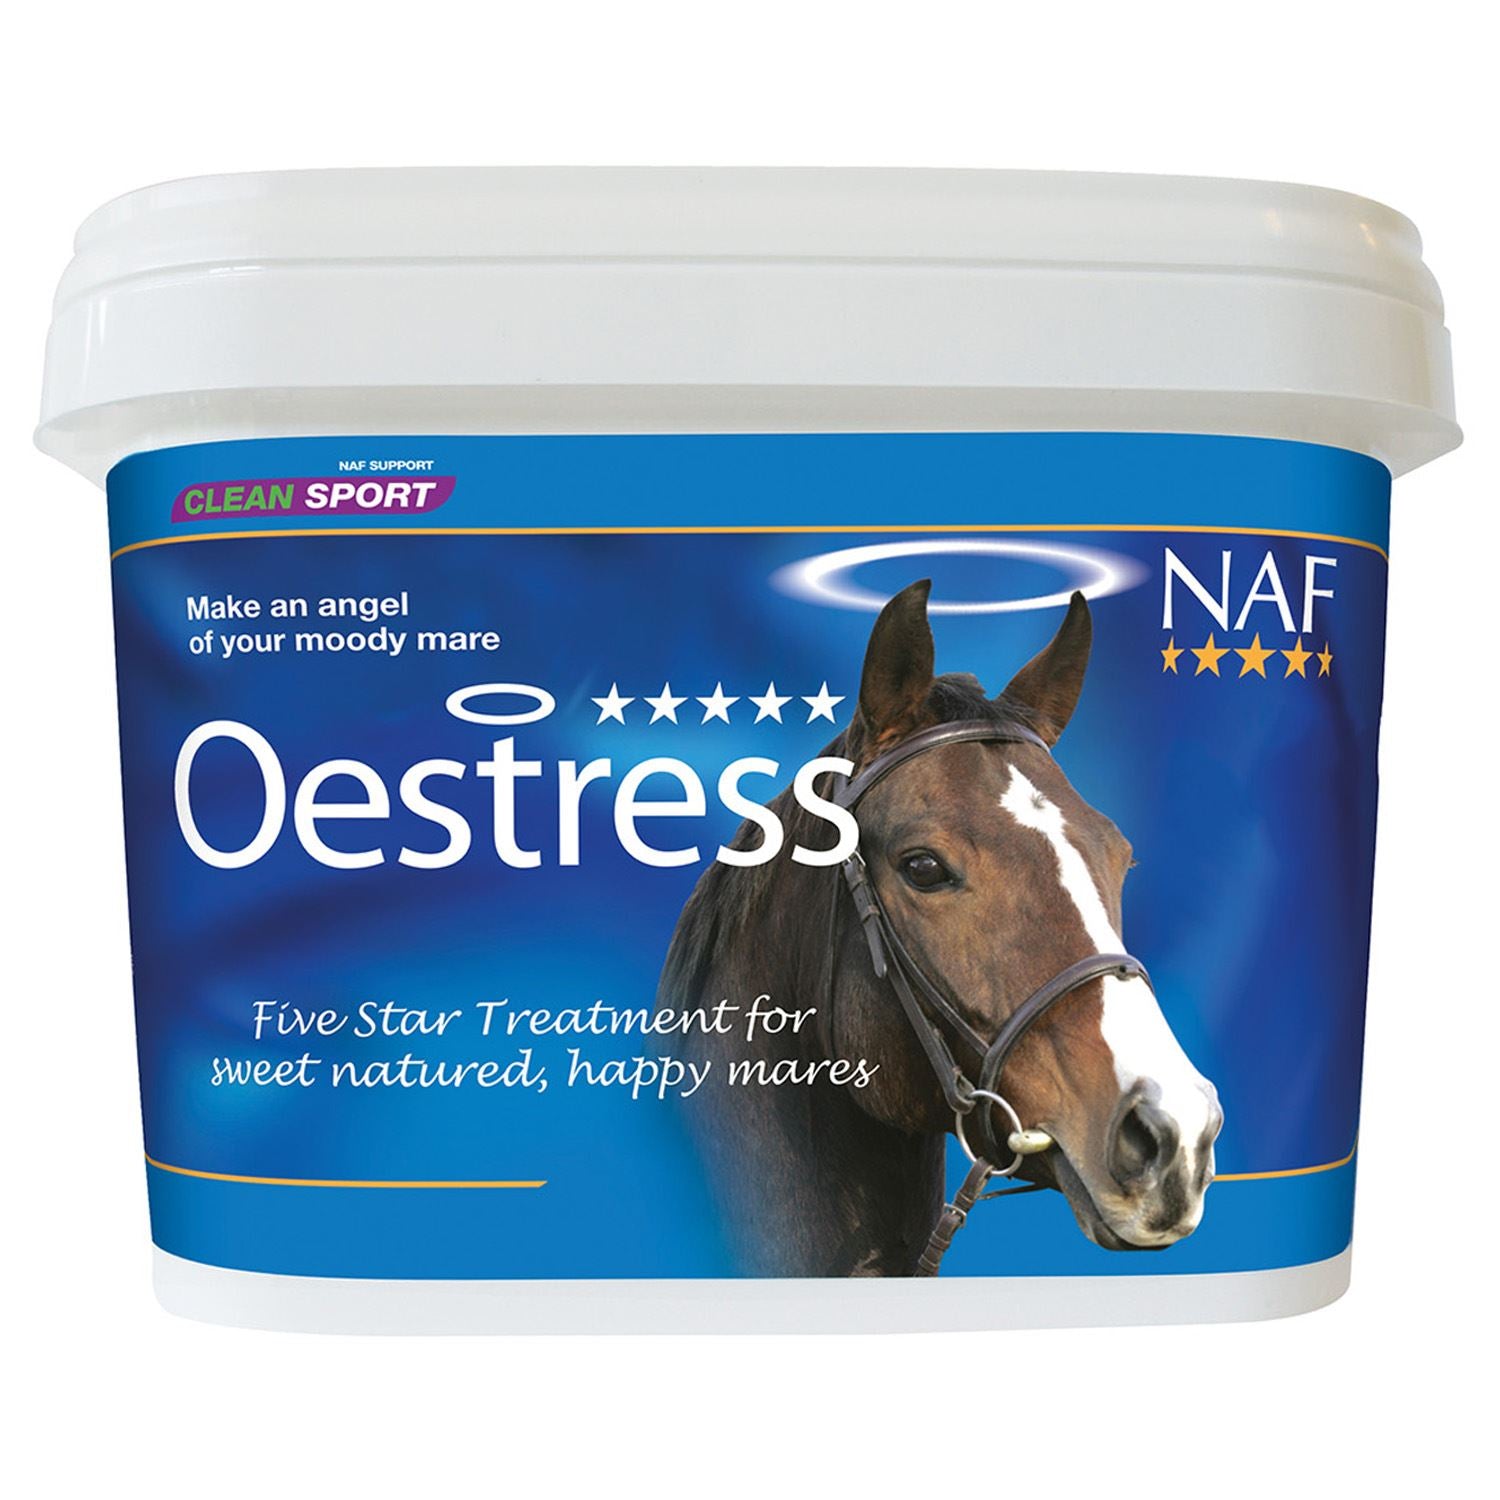 NAF Five Star Oestress for natural oestrus cycle management